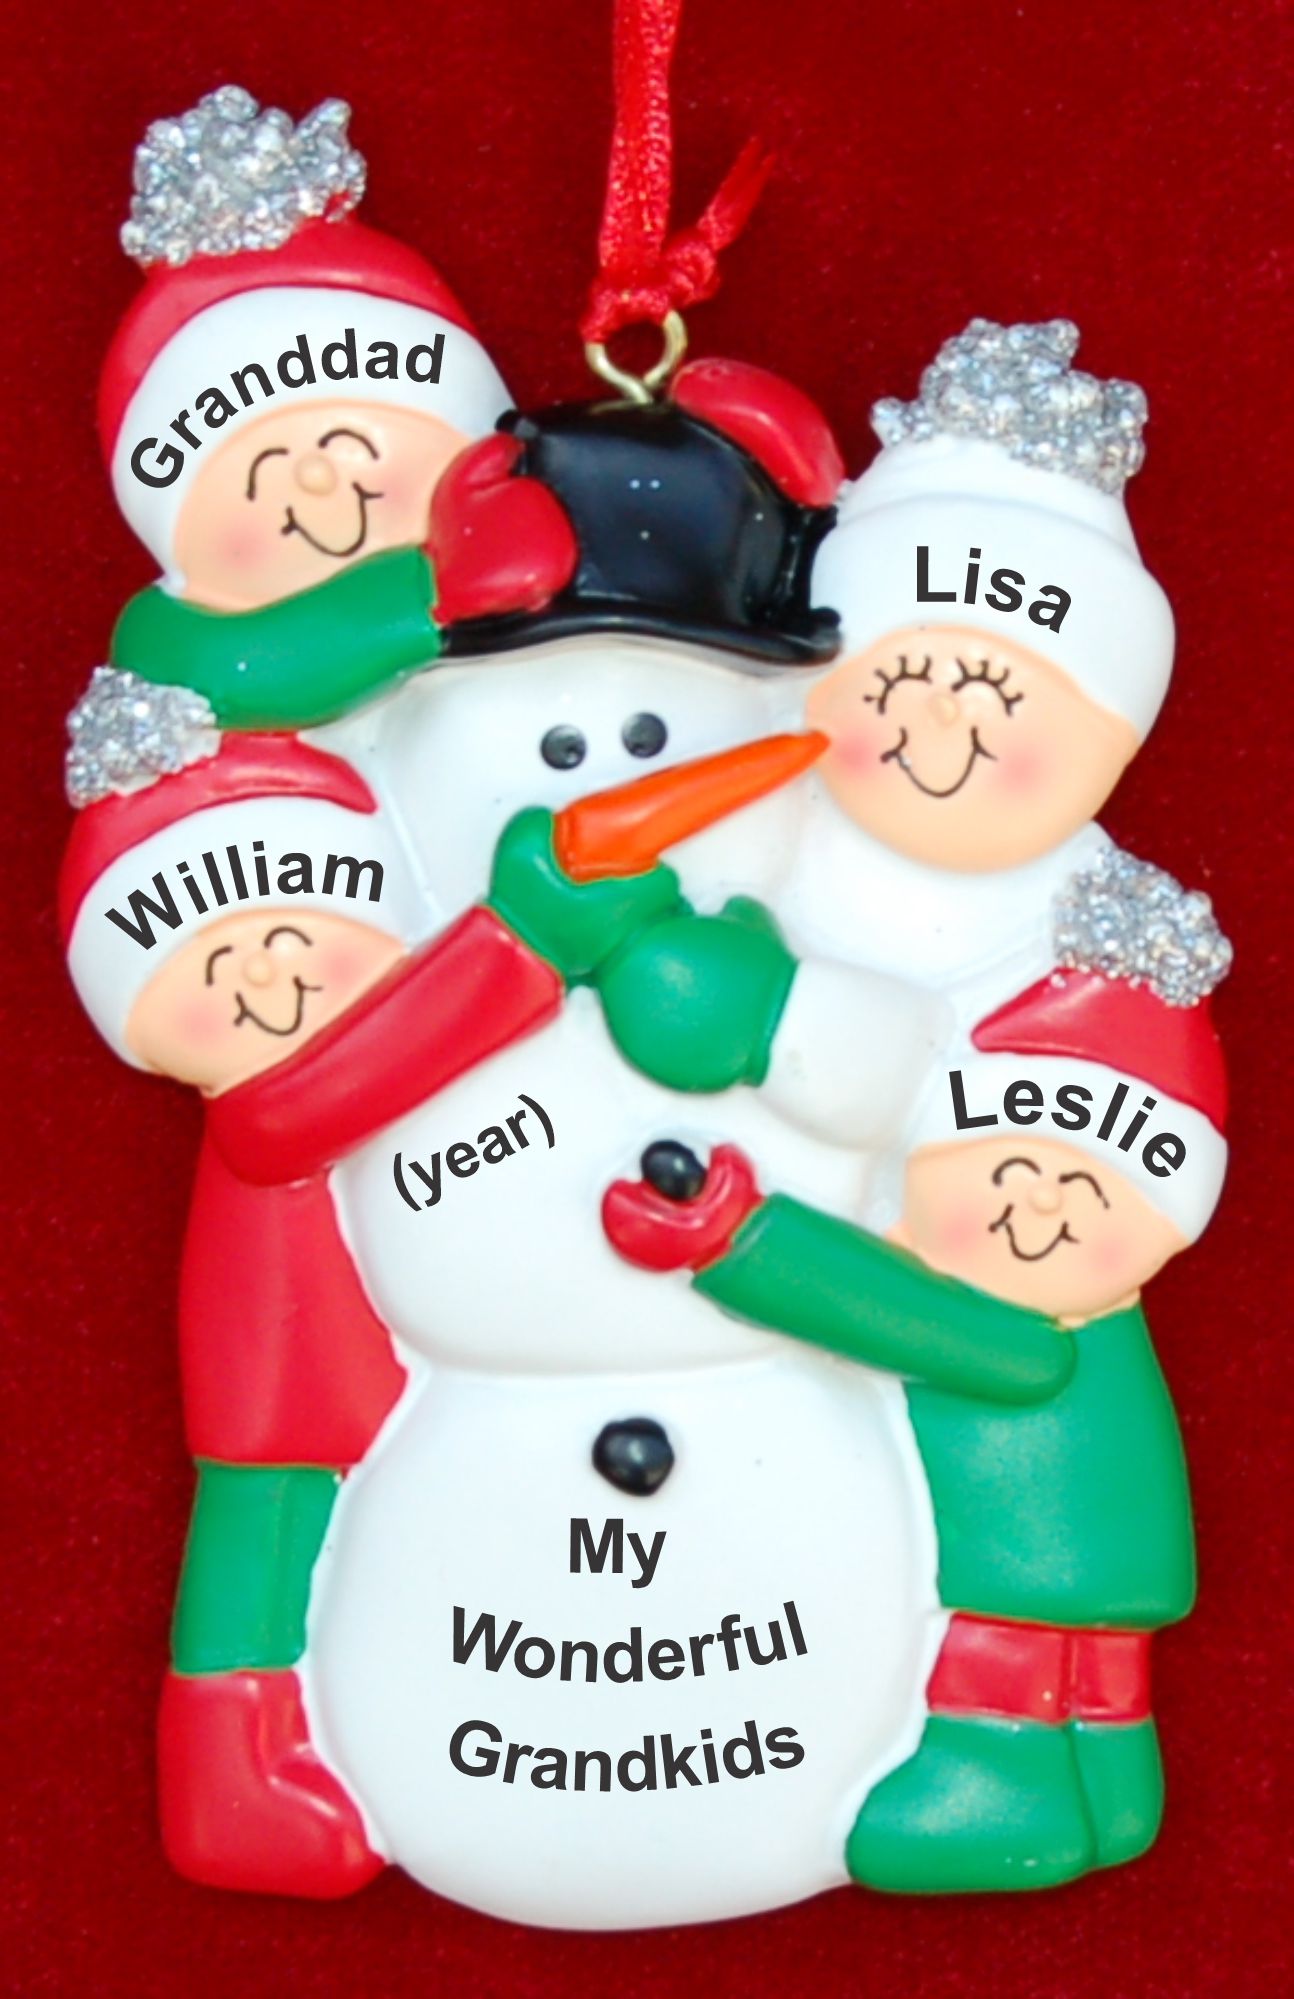 Grandfather Christmas Ornament Making Snowman 3 Grandkids by Russell Rhodes